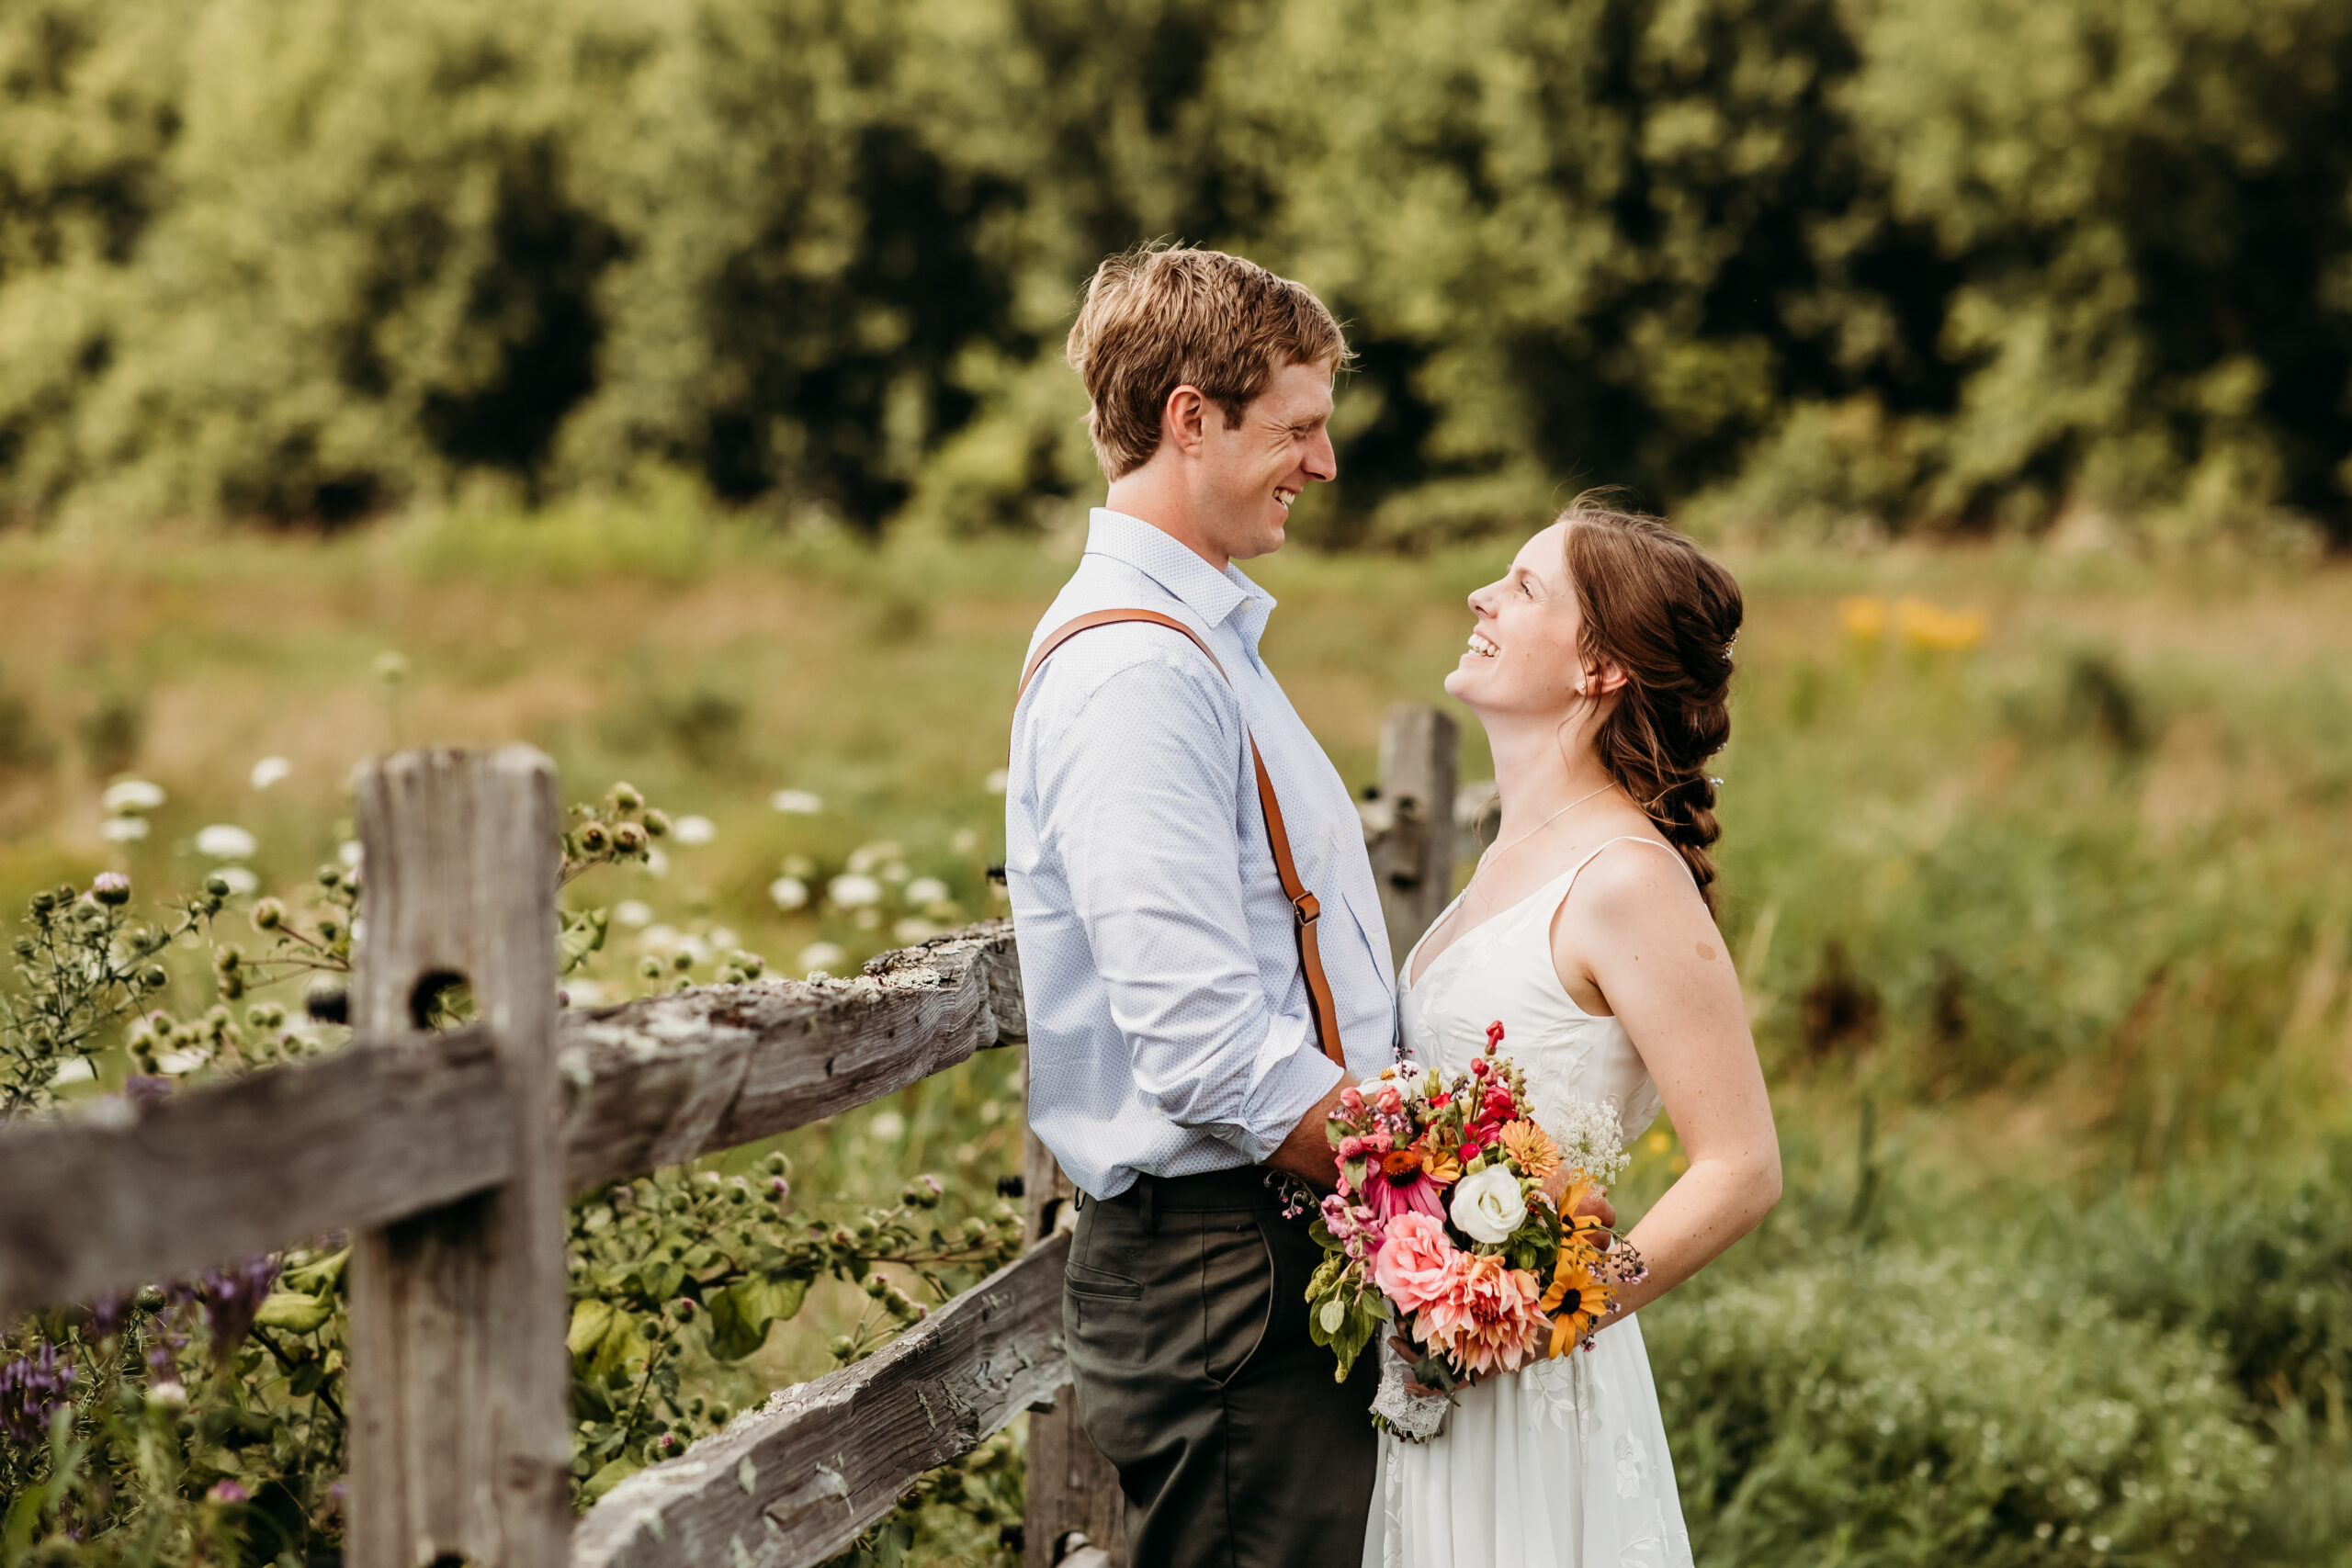 Greg and Jess standing together against a fence after their wedding ceremony at their farm wedding venue